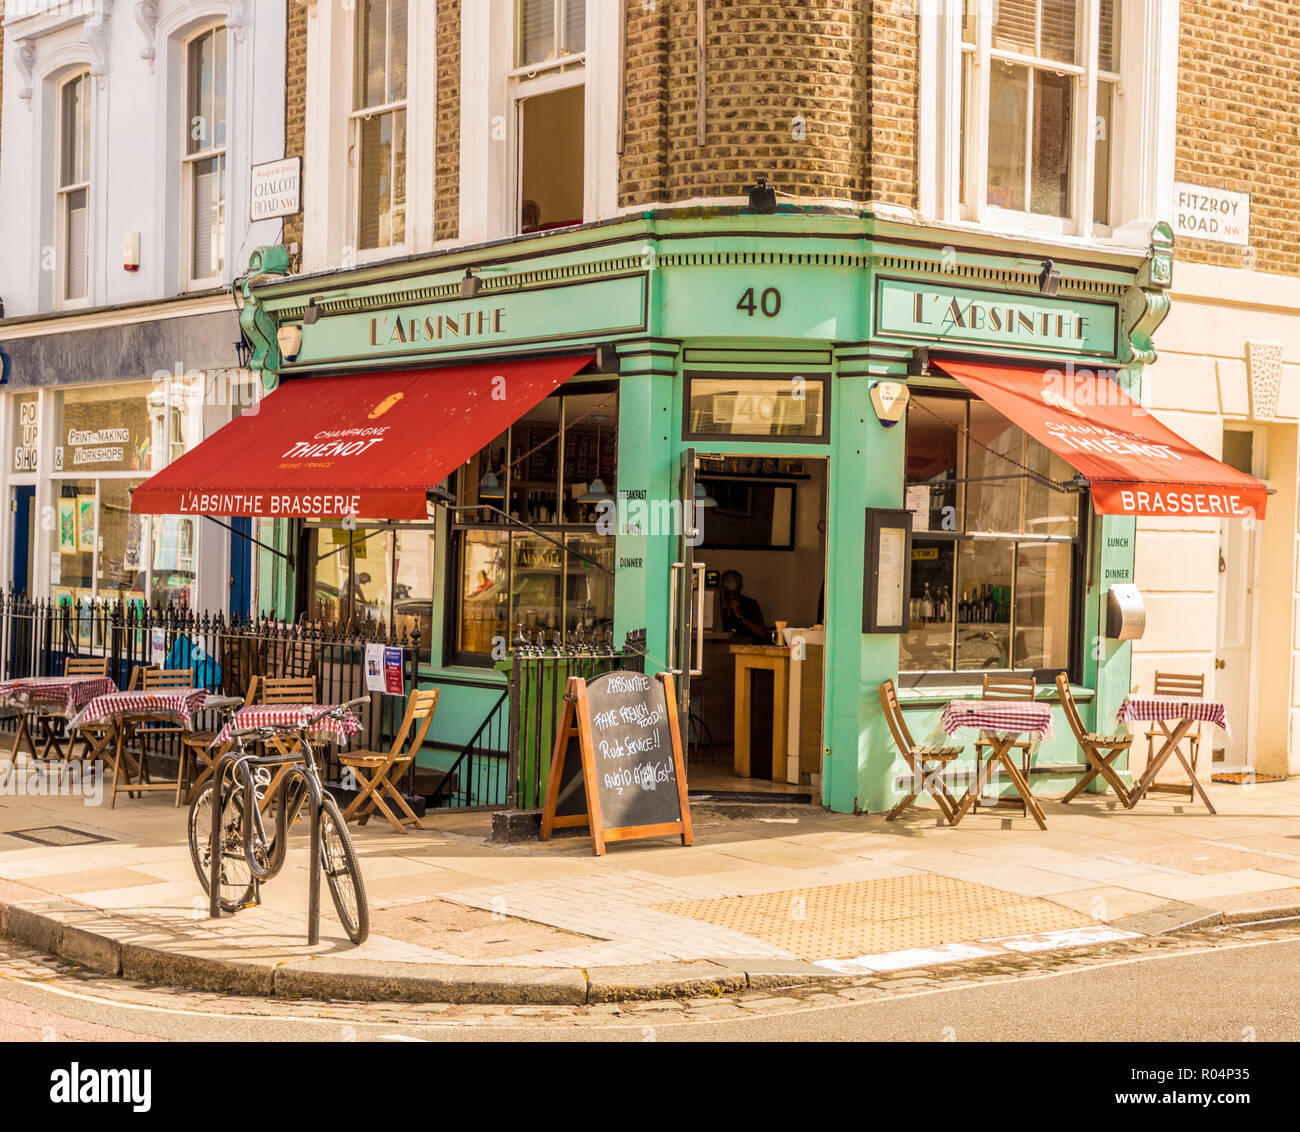 The pretty L' Absinthe restaurant and coffee shop in Primrose Hill, London, England, United Kingdom, Europe Stock Photo